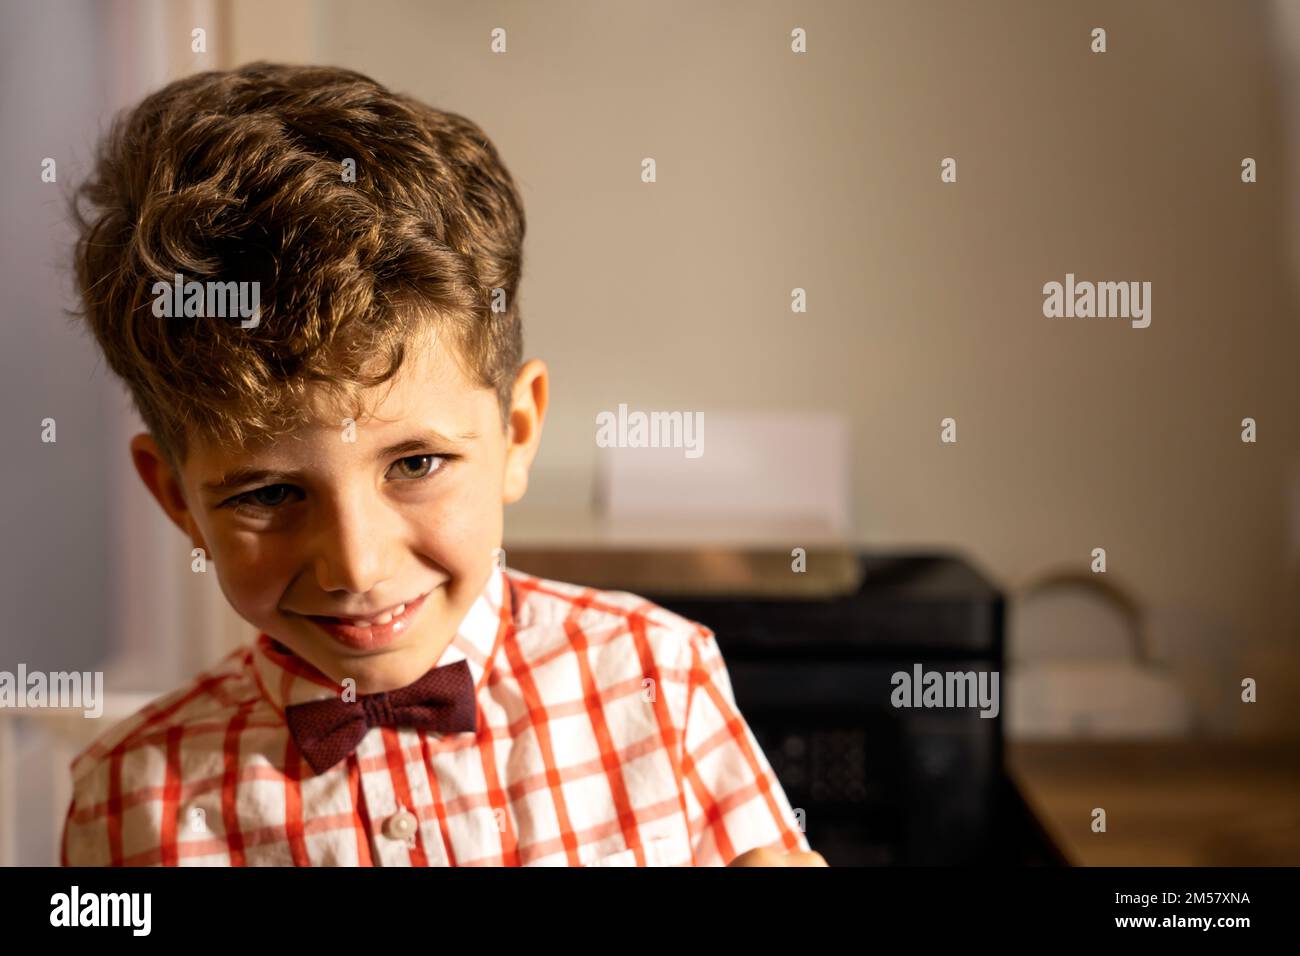 Cute preteen boy with curly brown hair in checkered shirt and bow tie in light room looking at camera Stock Photo